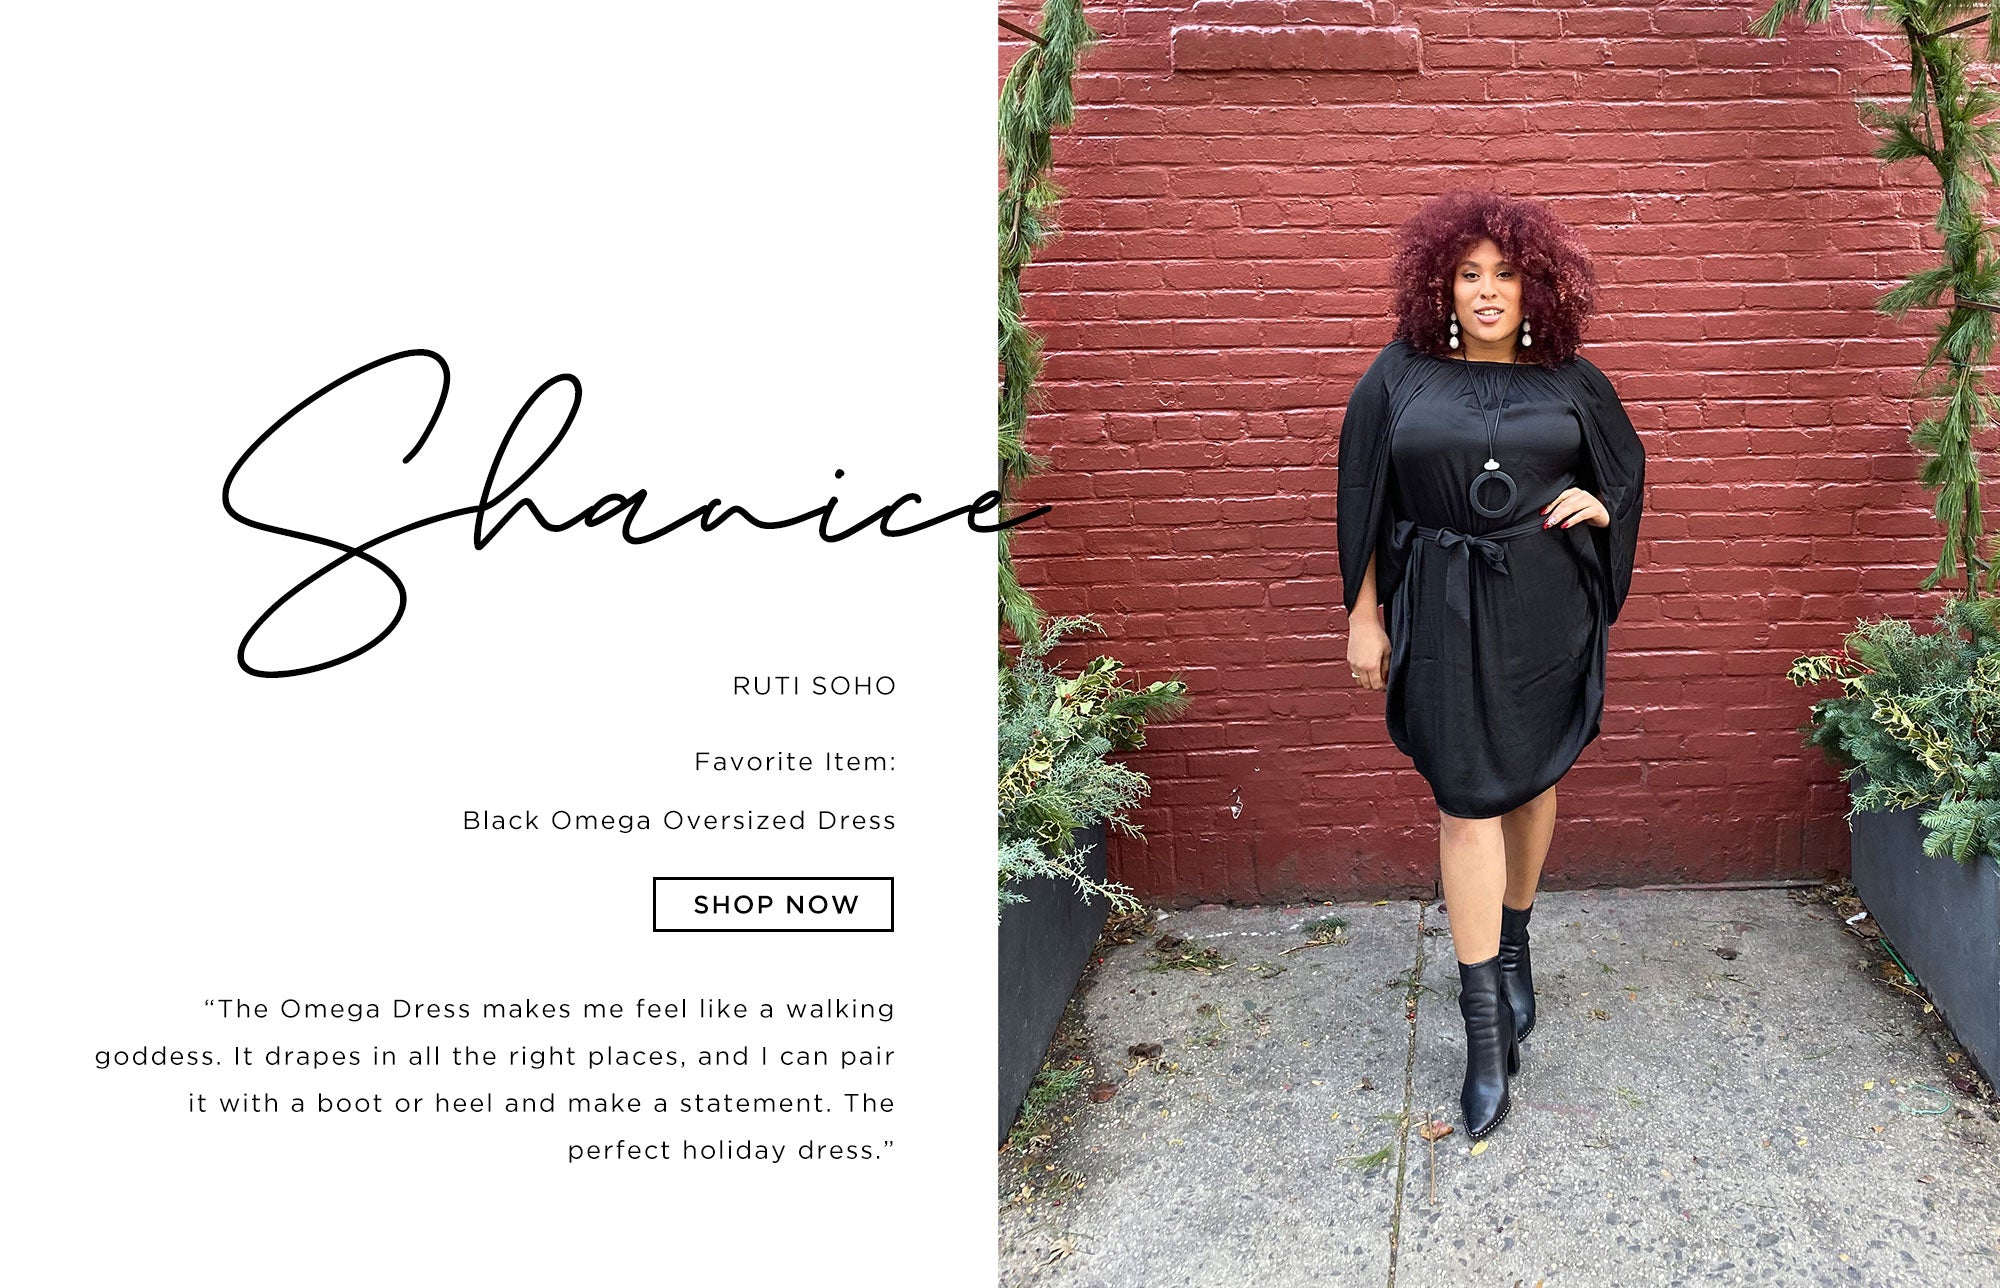 Shanice Ruti Soho   The Omega dress makes me feel like a walking goddess. It drapes in all the right places, and I can pair it with a boot or heel and make a statement. The perfect holiday dress.